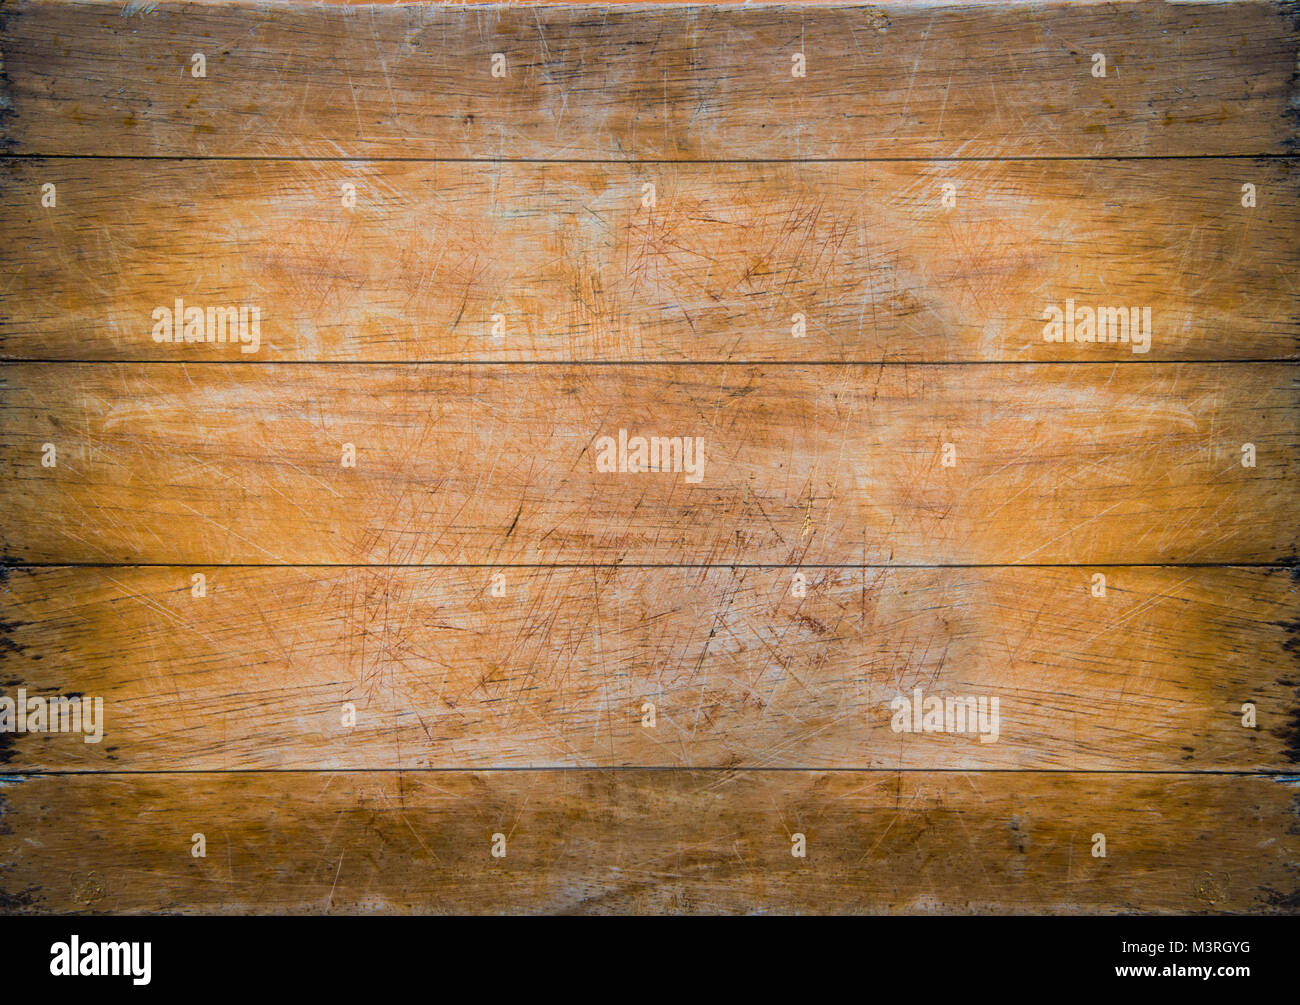 Grunge wood vintage texture background with vignette, Grunge wood texture background is popular vintage background for graphic designer. Wood texture  Stock Photo